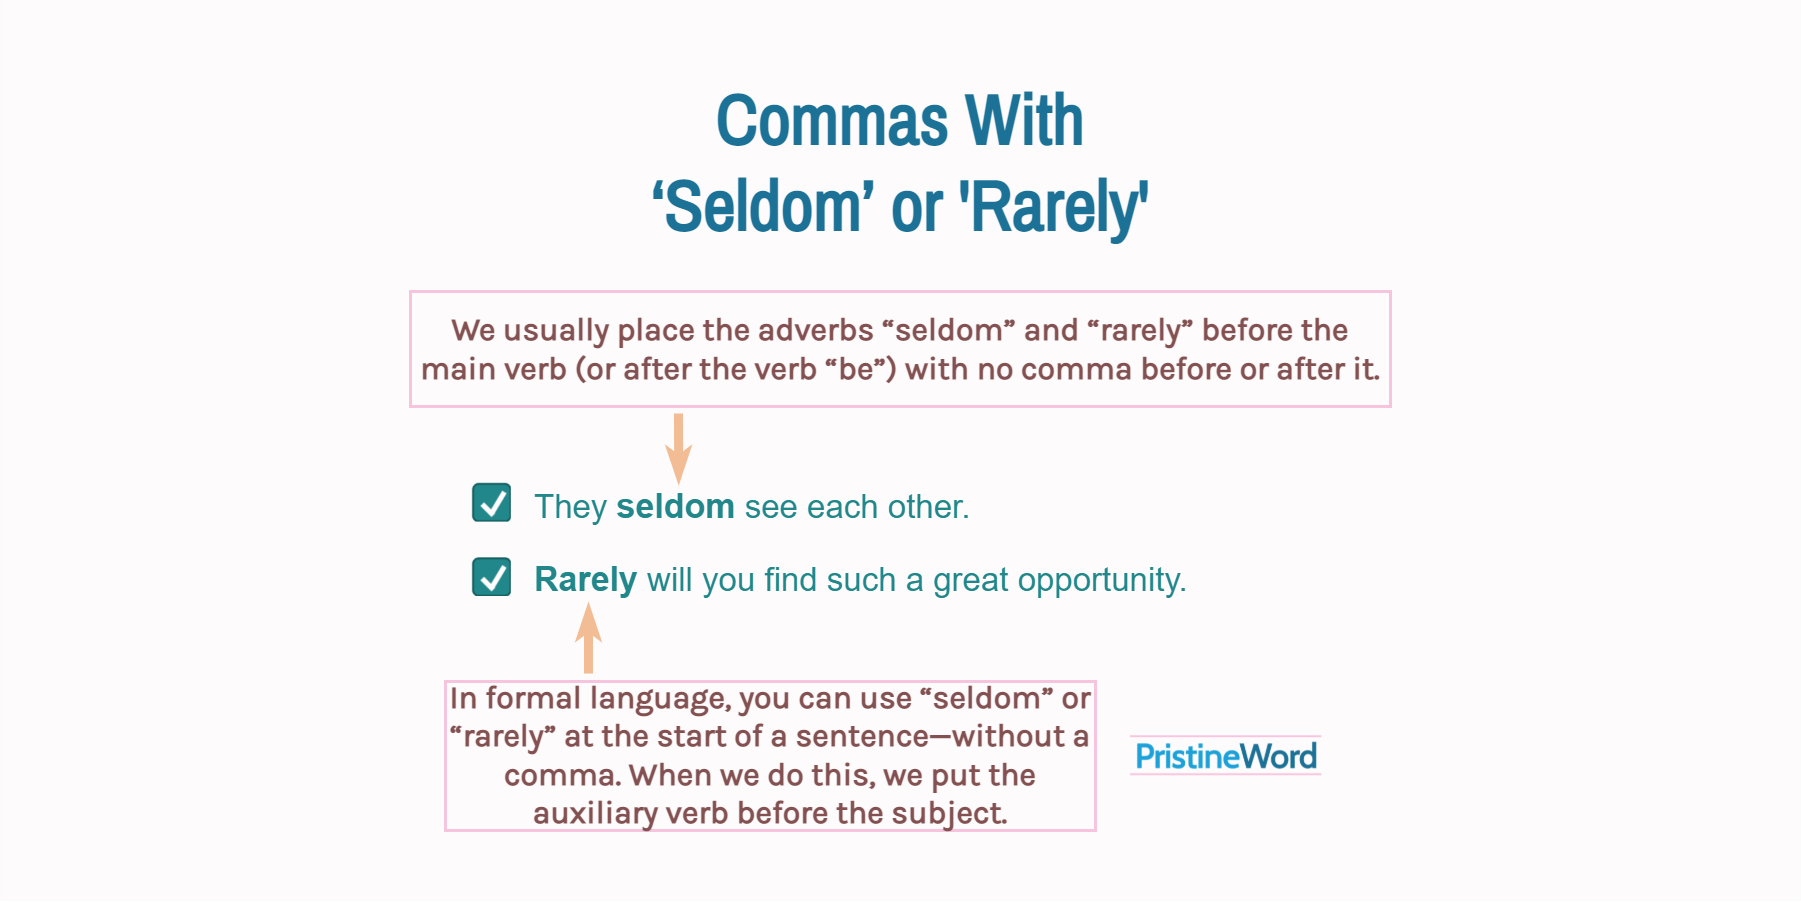 Do You Need a Comma With 'SELDOM' or 'RARELY'?